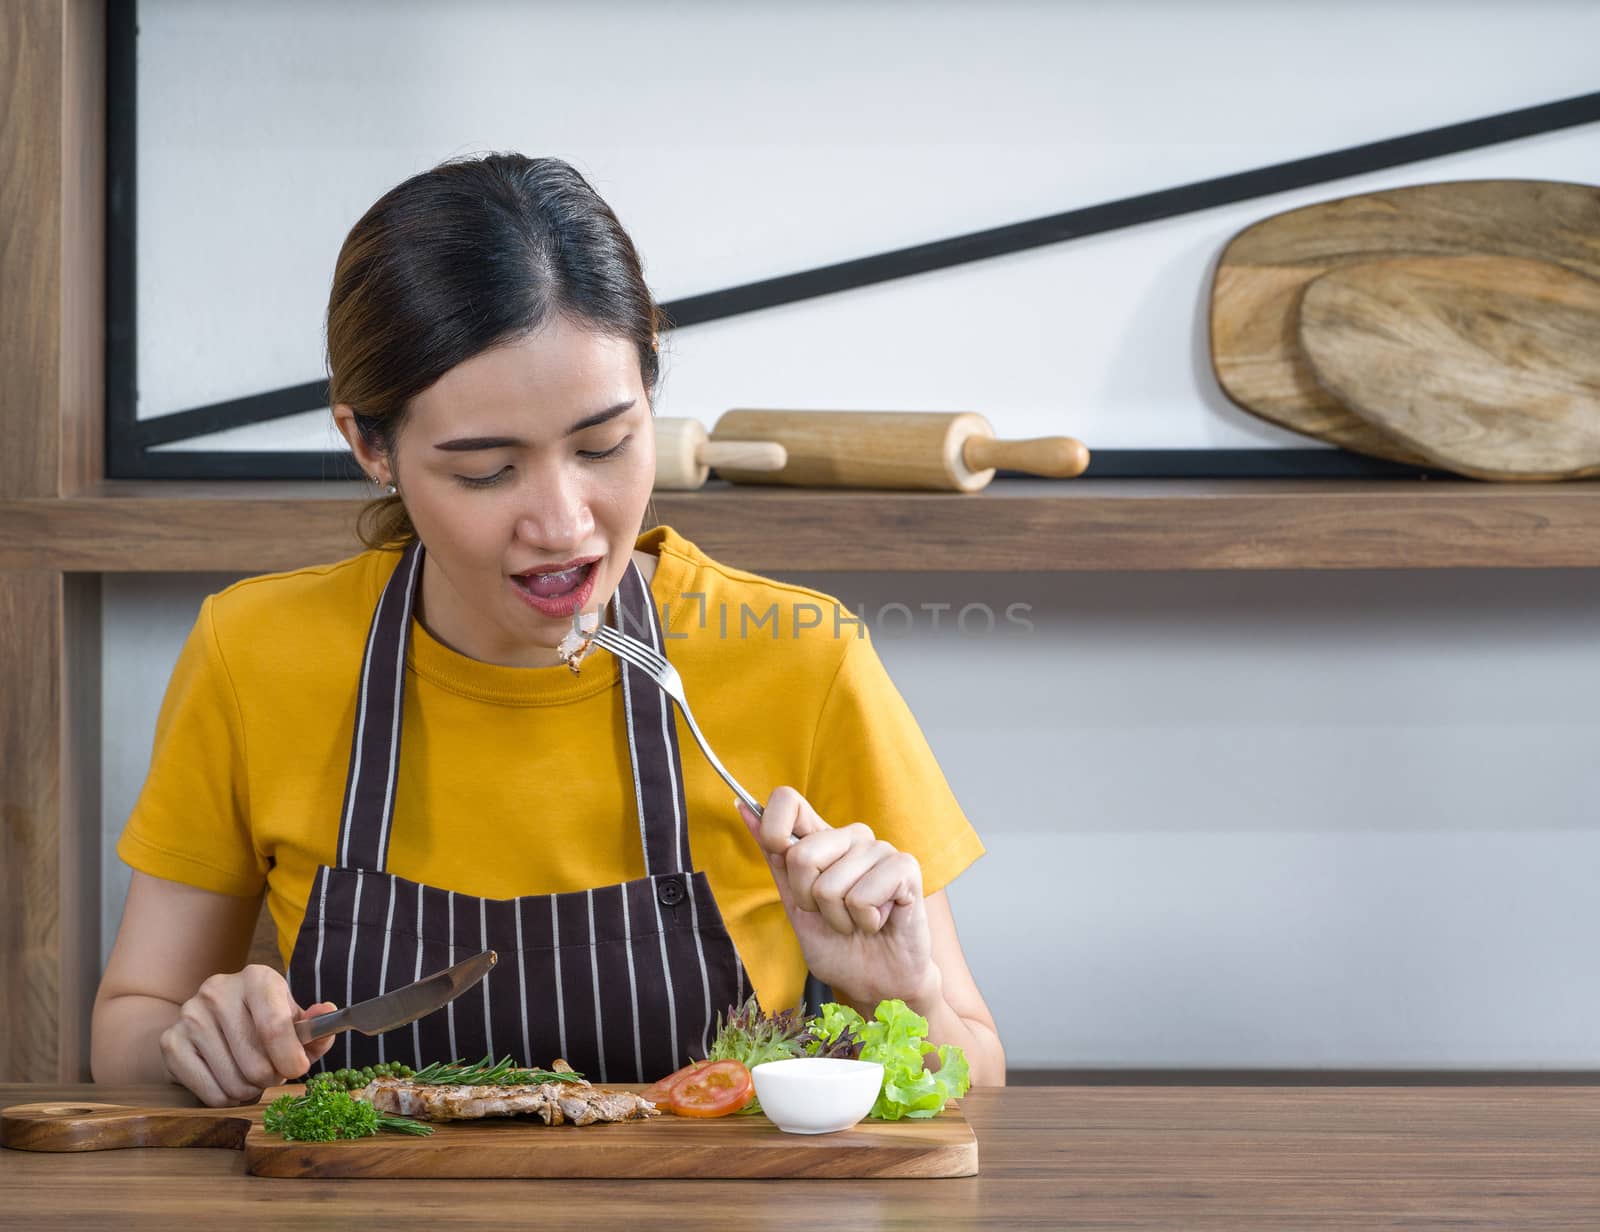 The housewife dressed in an apron enjoy eating the delicious steak. Morning atmosphere in a modern kitchen